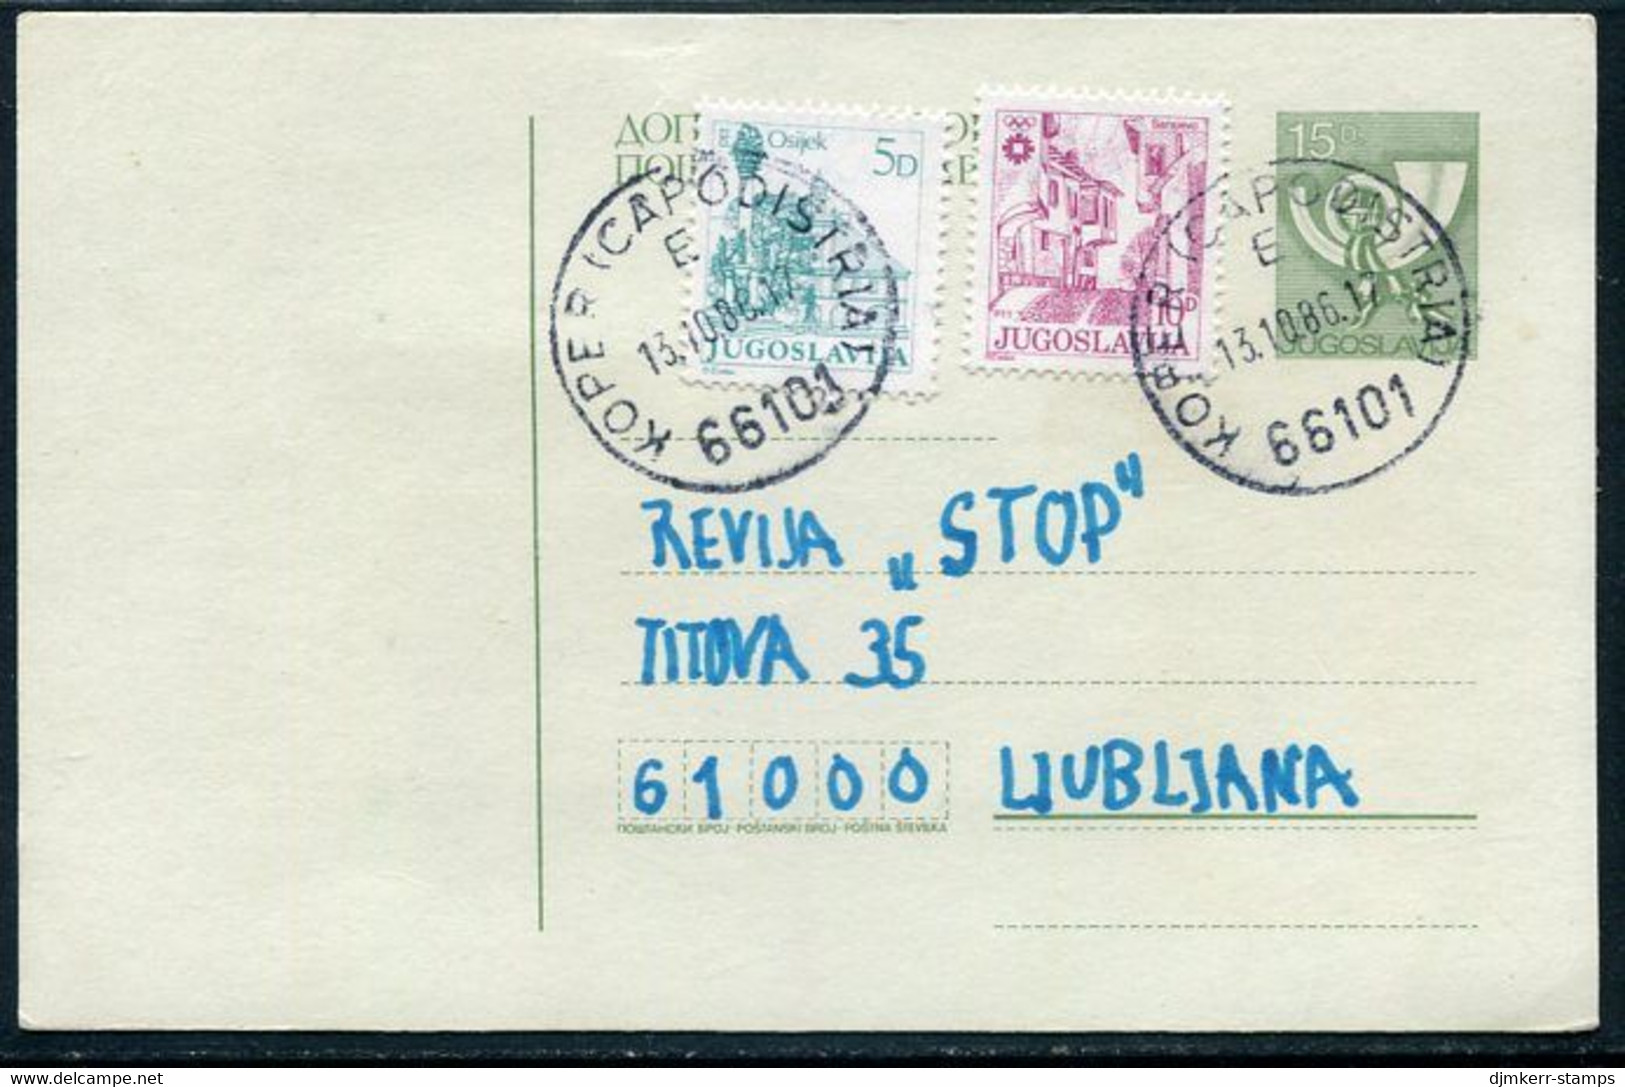 YUGOSLAVIA 1986 Posthorn 15 D. Stationery Card Used With Additional Franking.  Michel  P187 - Interi Postali